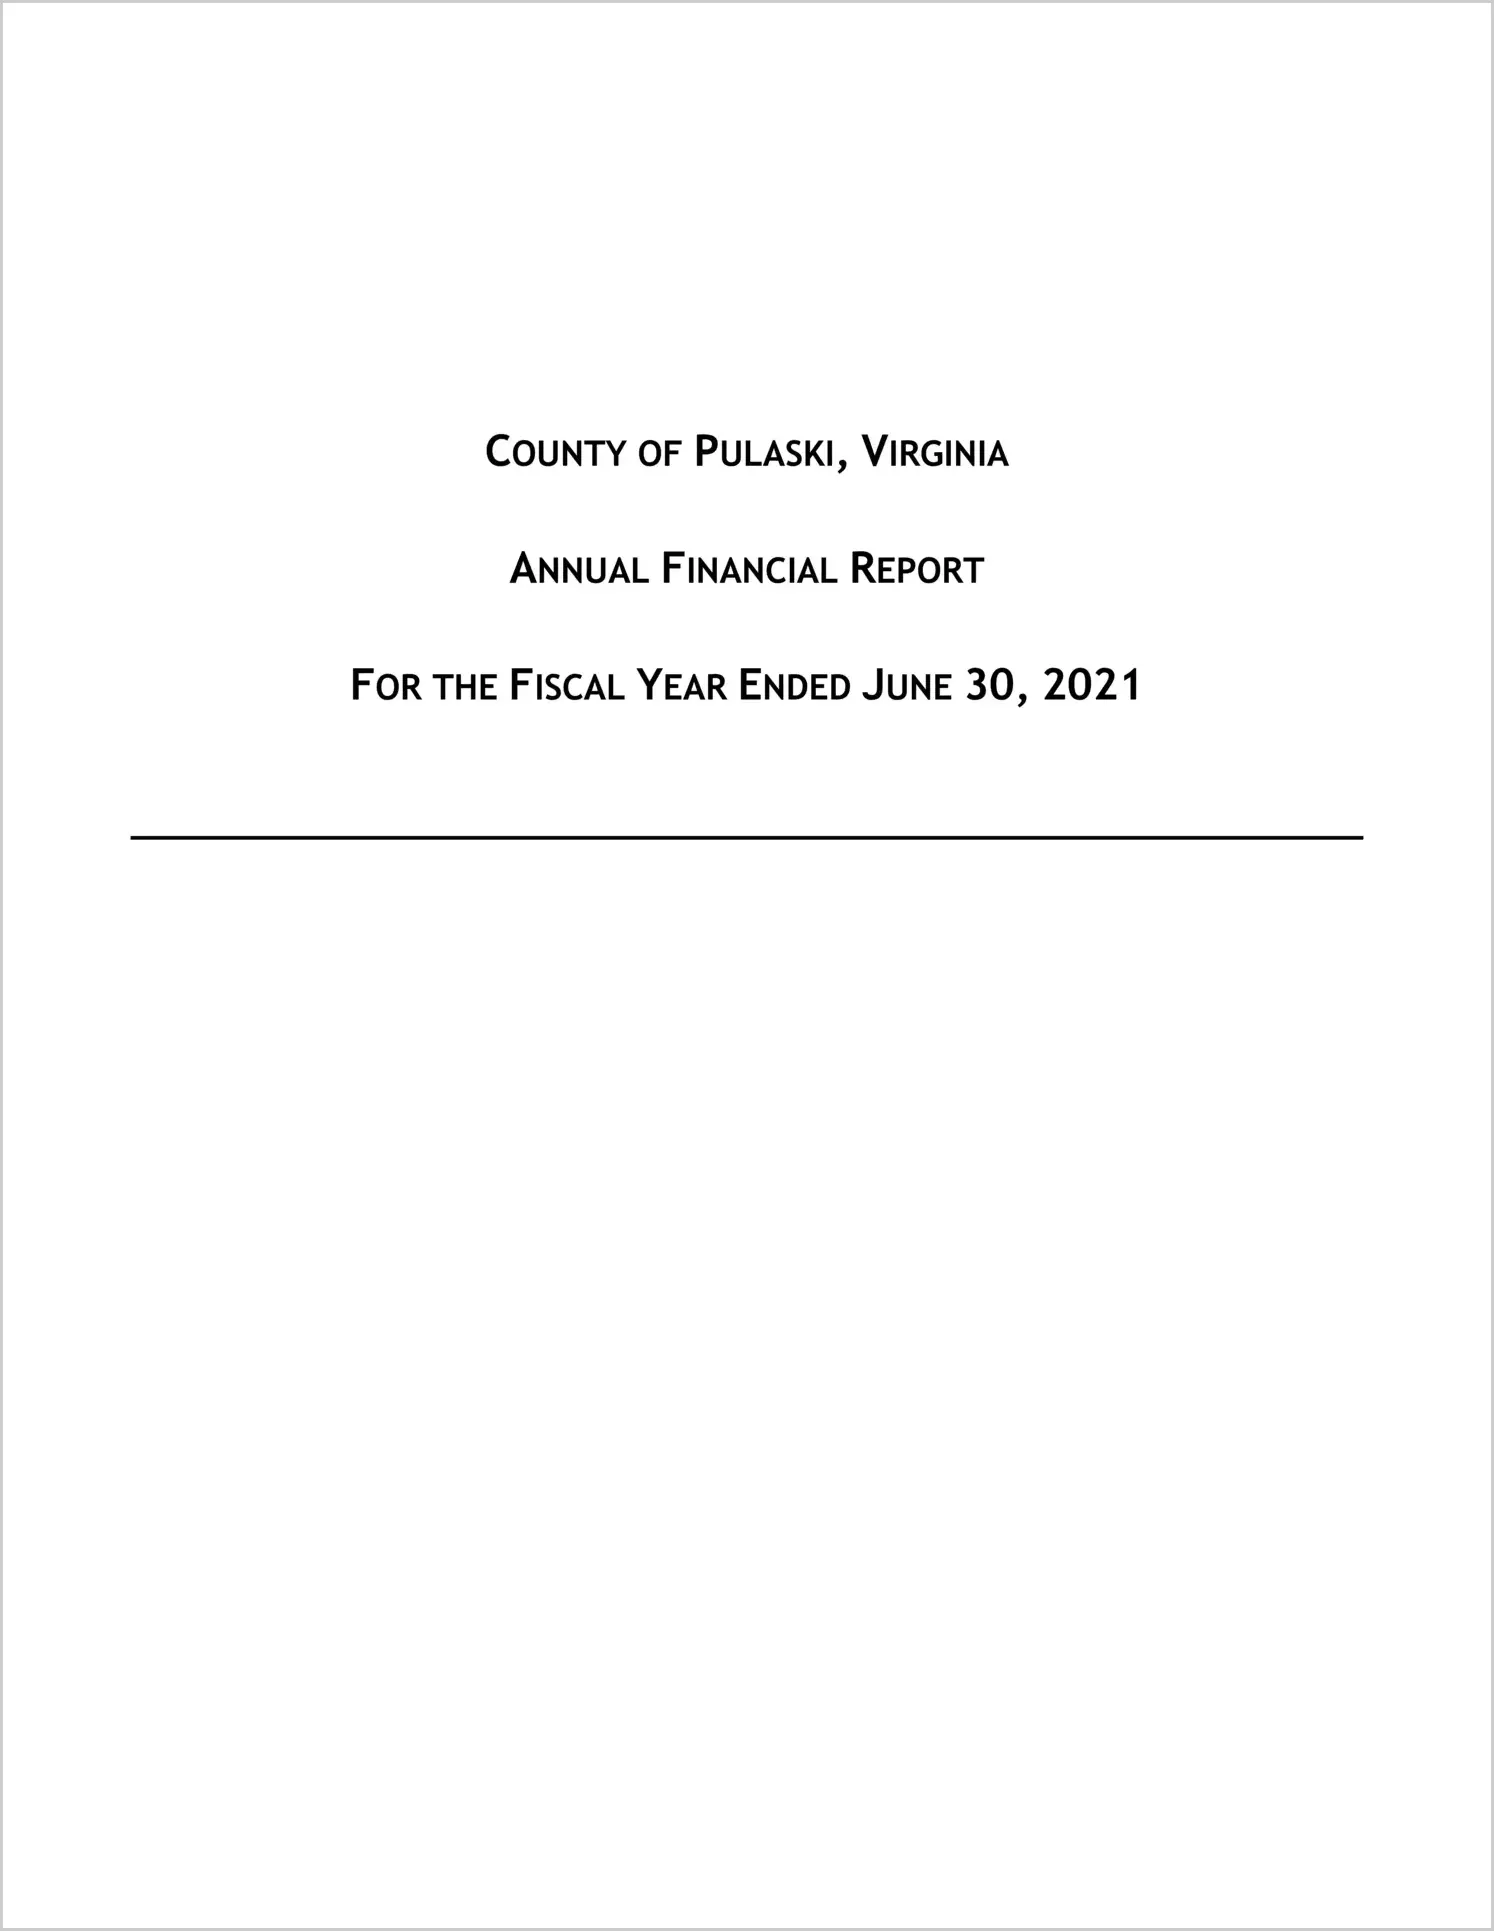 2021 Annual Financial Report for County of Pulaski